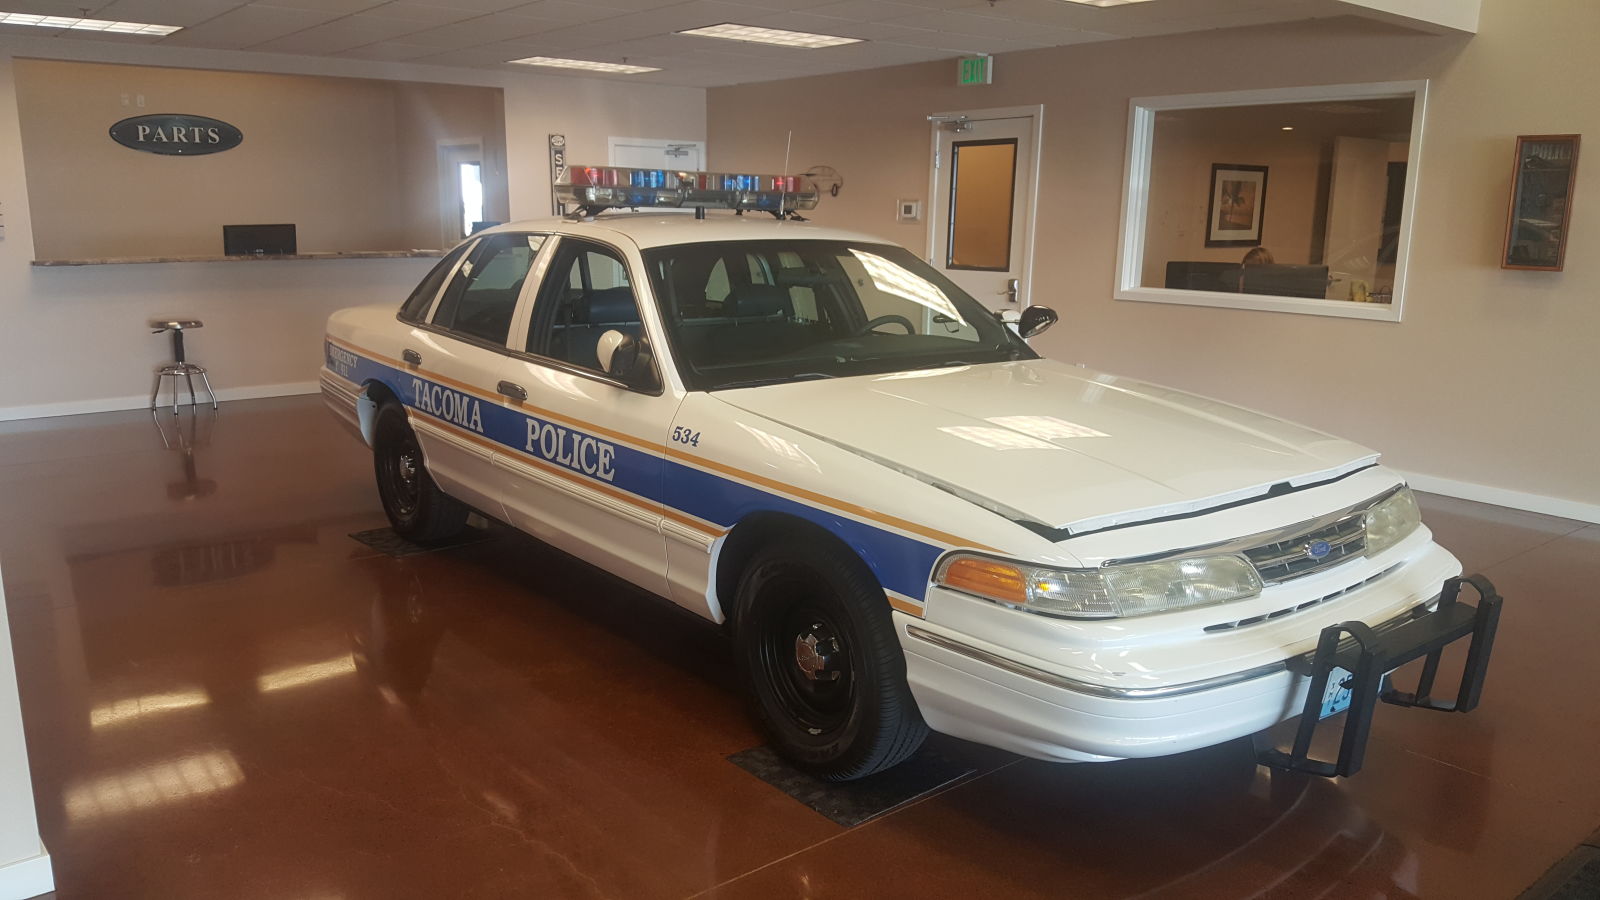 First-gen Crown Victoria Police Interceptor from Tacoma PD, Aero Body. Most of us grew up seeing these in our neighborhoods.